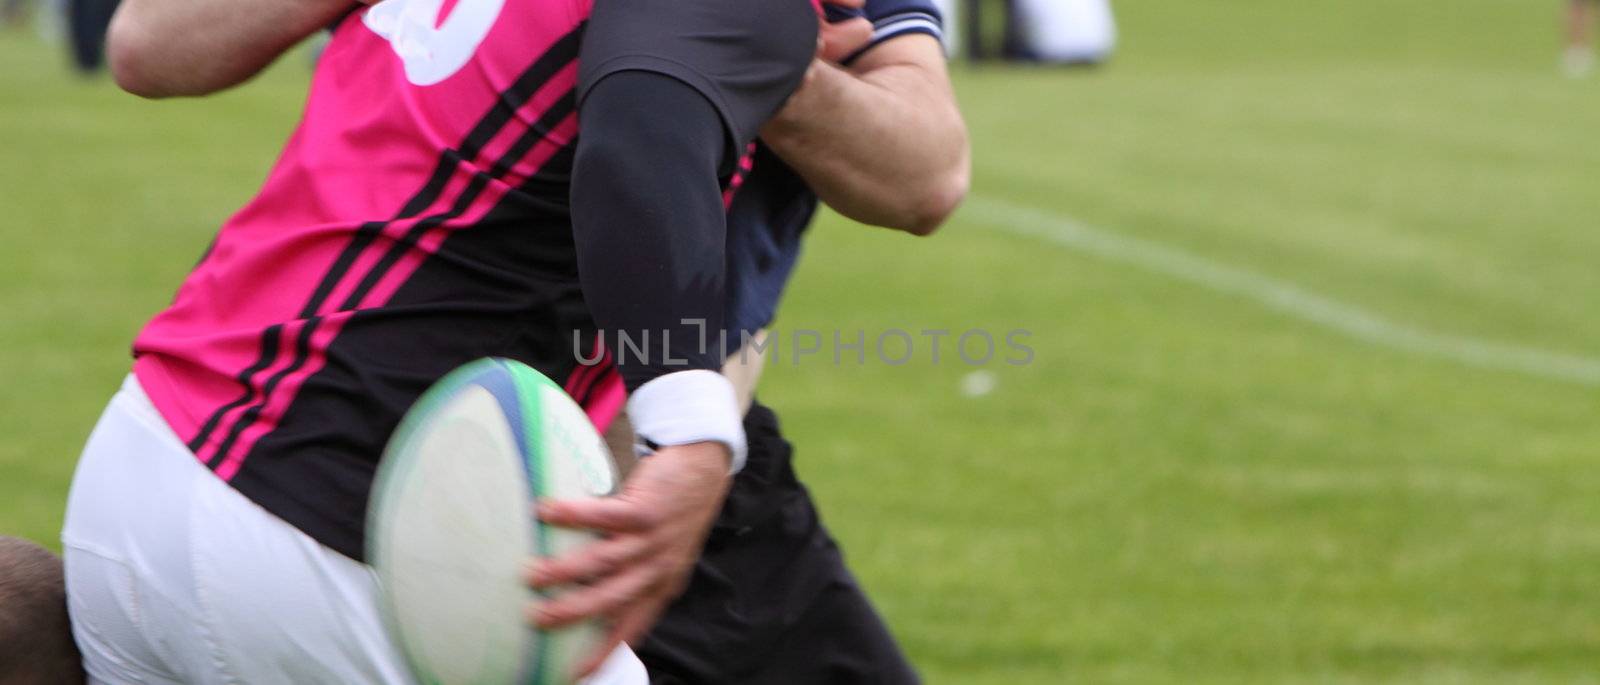 rugby with motion blur